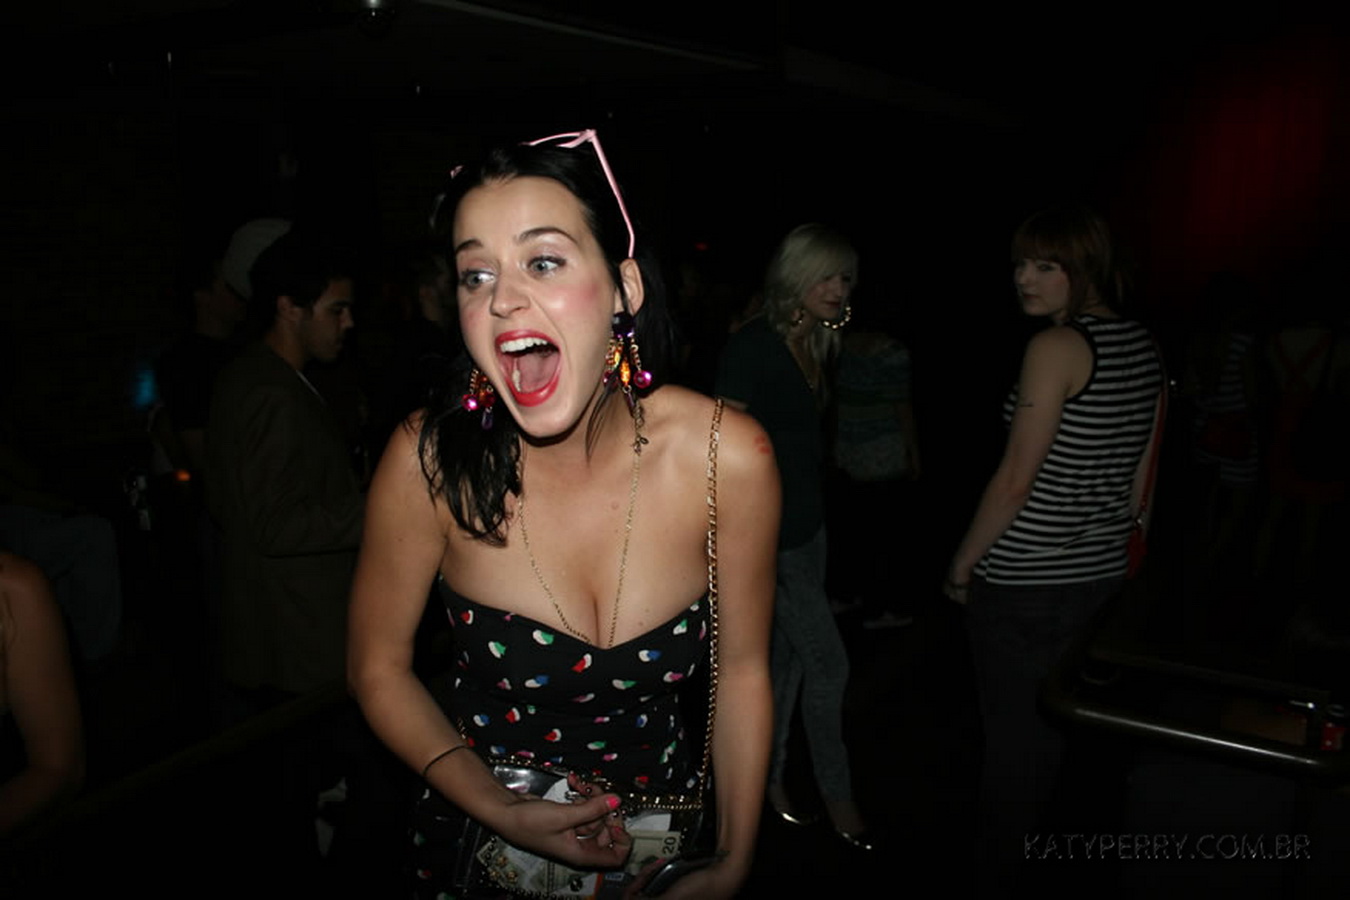 Katy_Perry_bobsslip_drunk_cleavage_downblouse_upskirt_nipslip_at_her_birthday_2007_party_99x_HQ_47.jpg